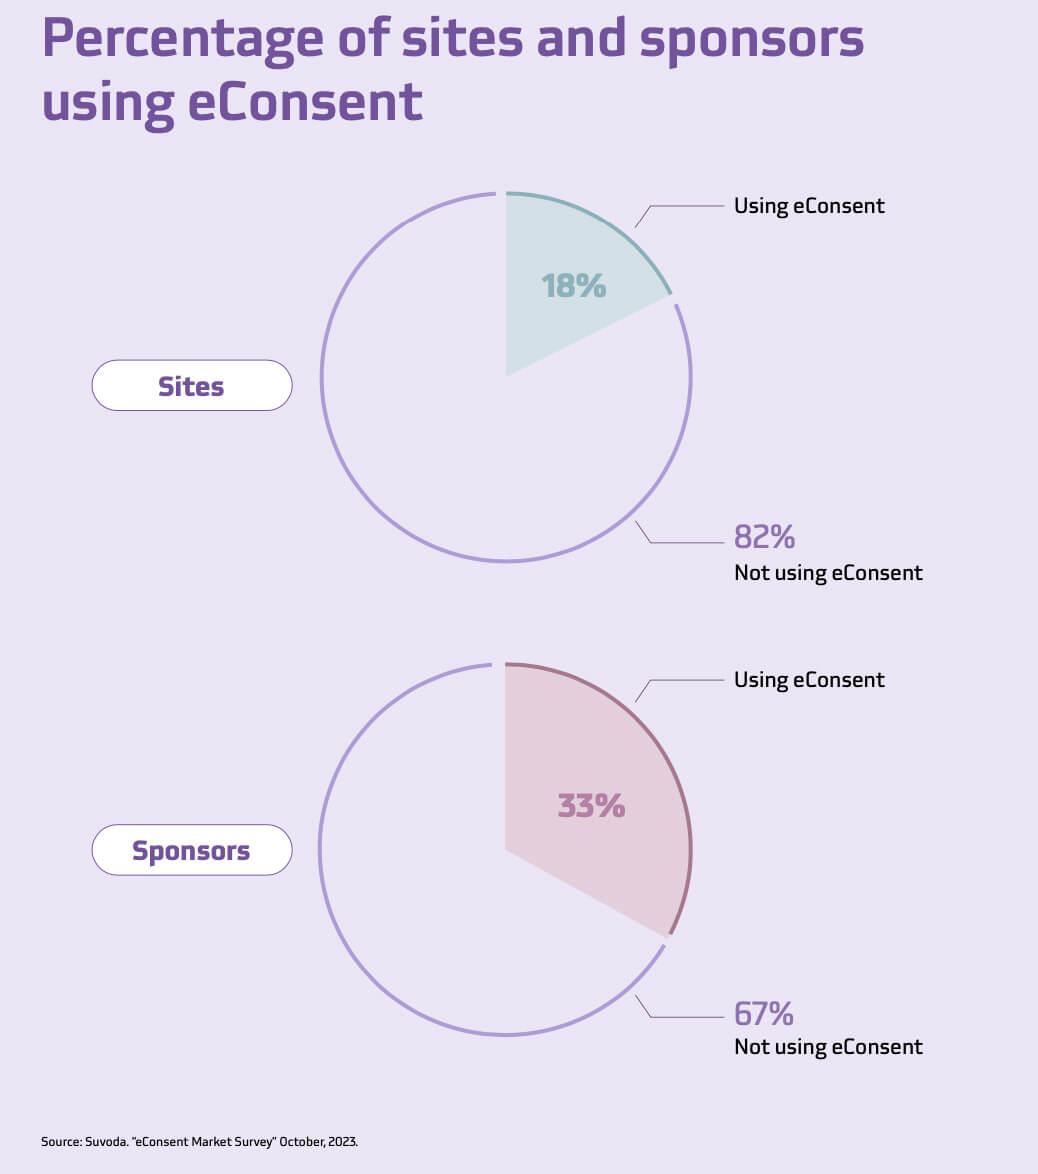 Percentage of site sponsors who use eConsent